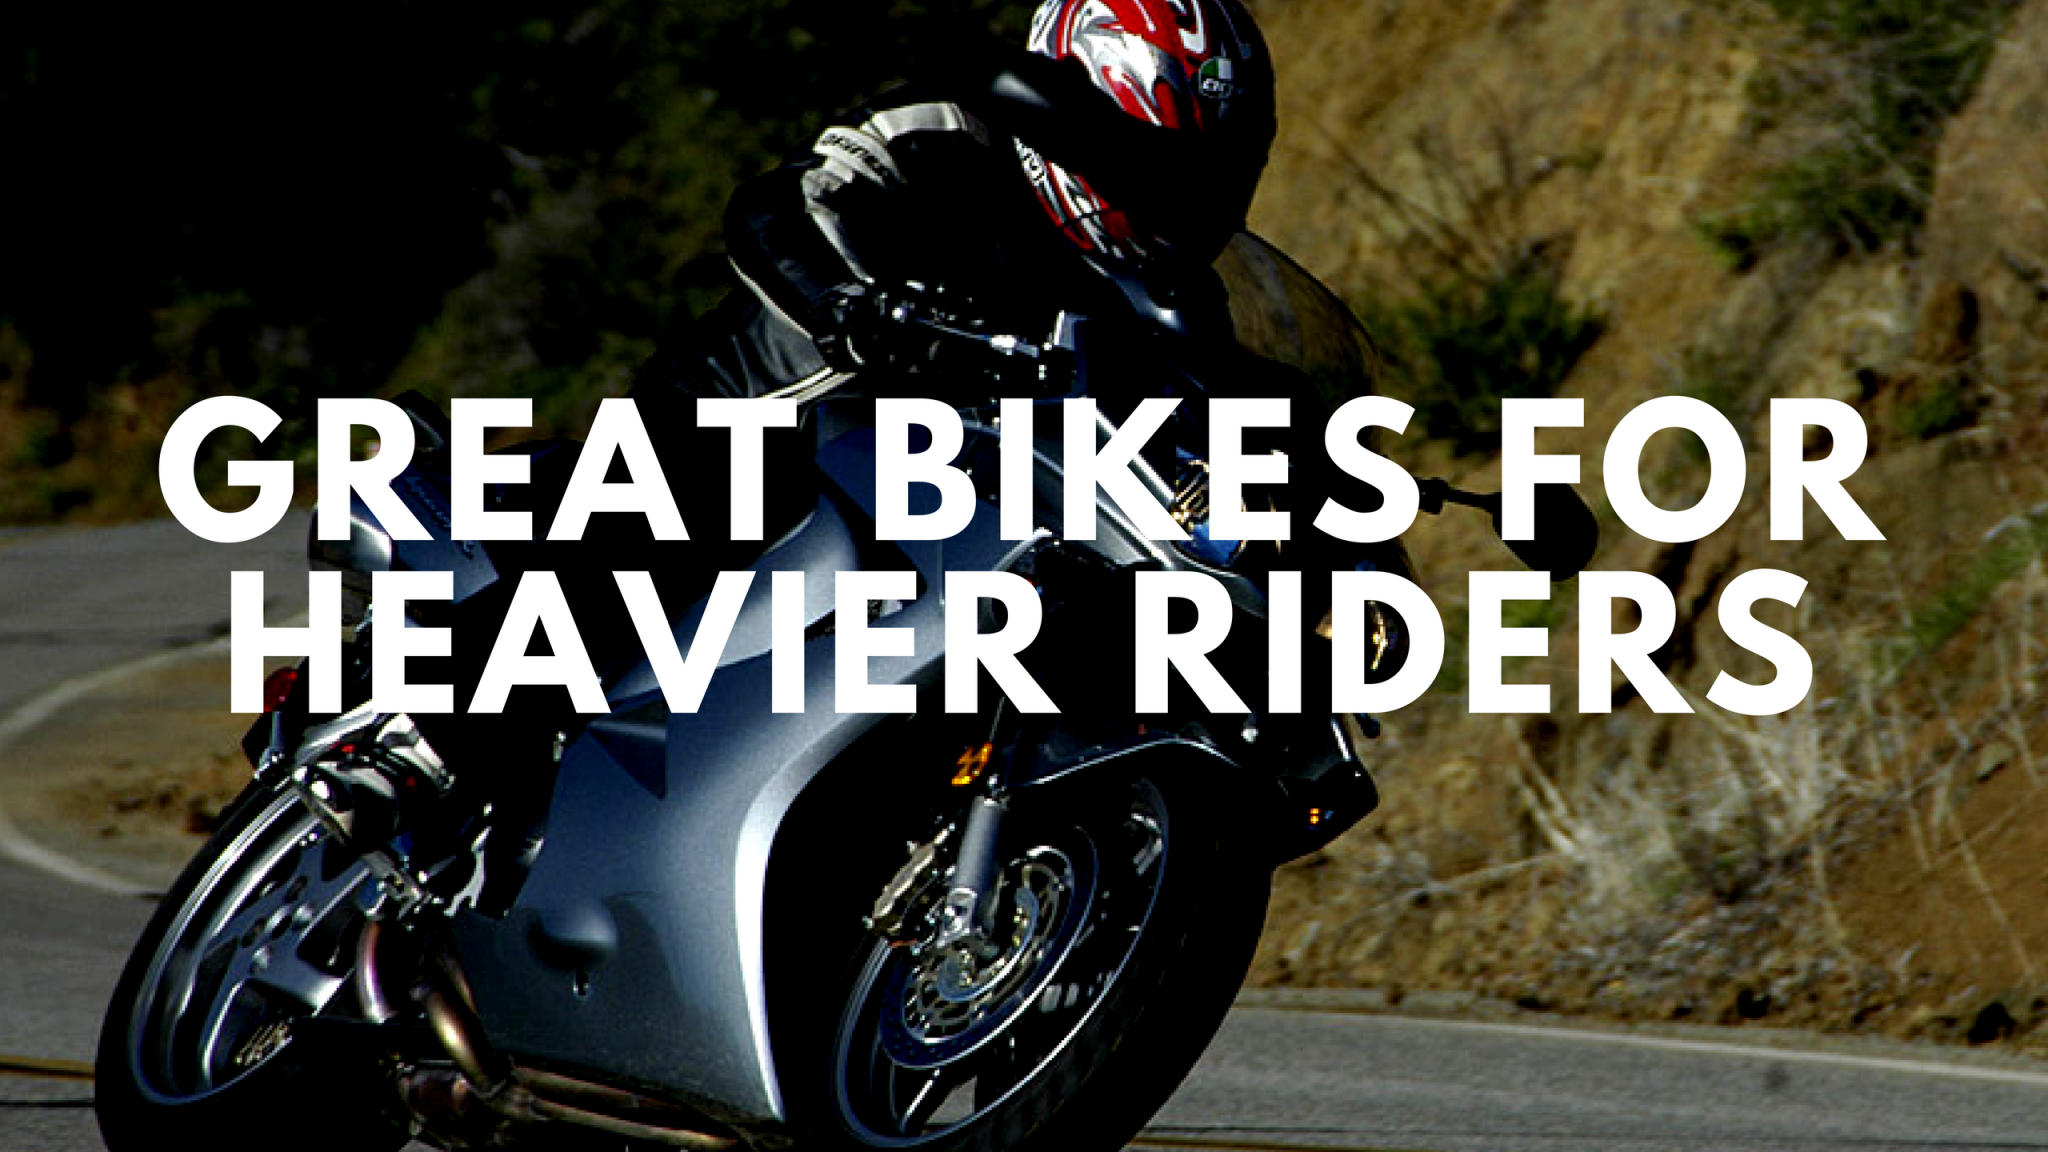 Starter Motorcycles for Heavier People | Top Lists ...